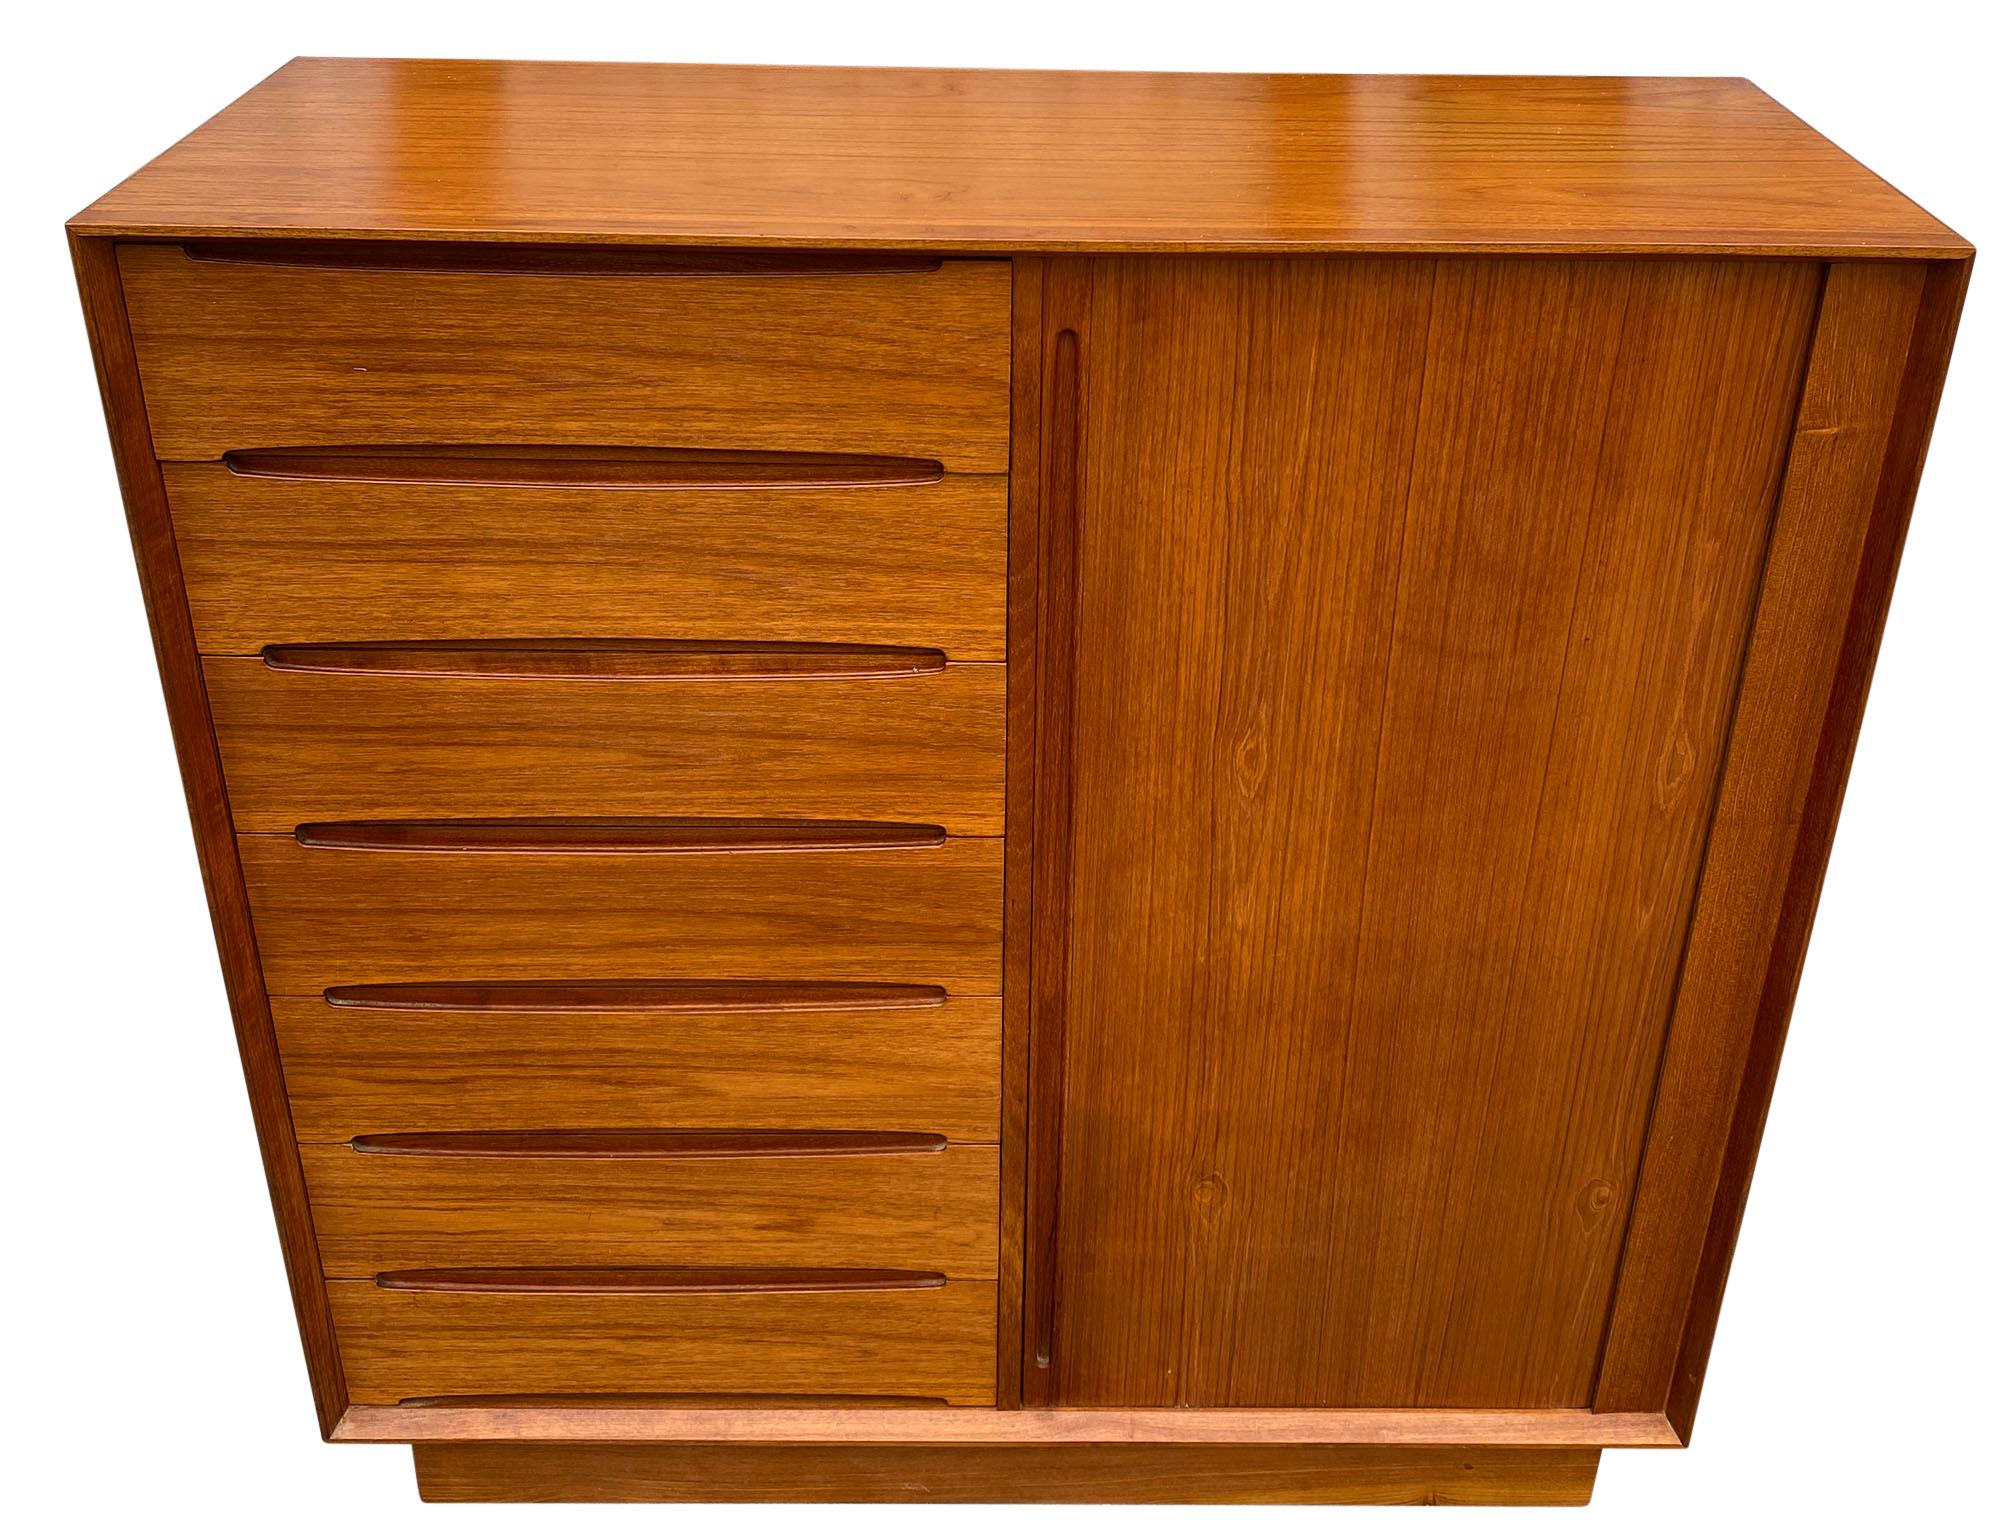 Midcentury tall Dyrlund teak dresser credenza 7-drawer on left. Clean inside and out - labeled - Made in Denmark. Good vintage condition. Has right sliding door with 8 drawers.